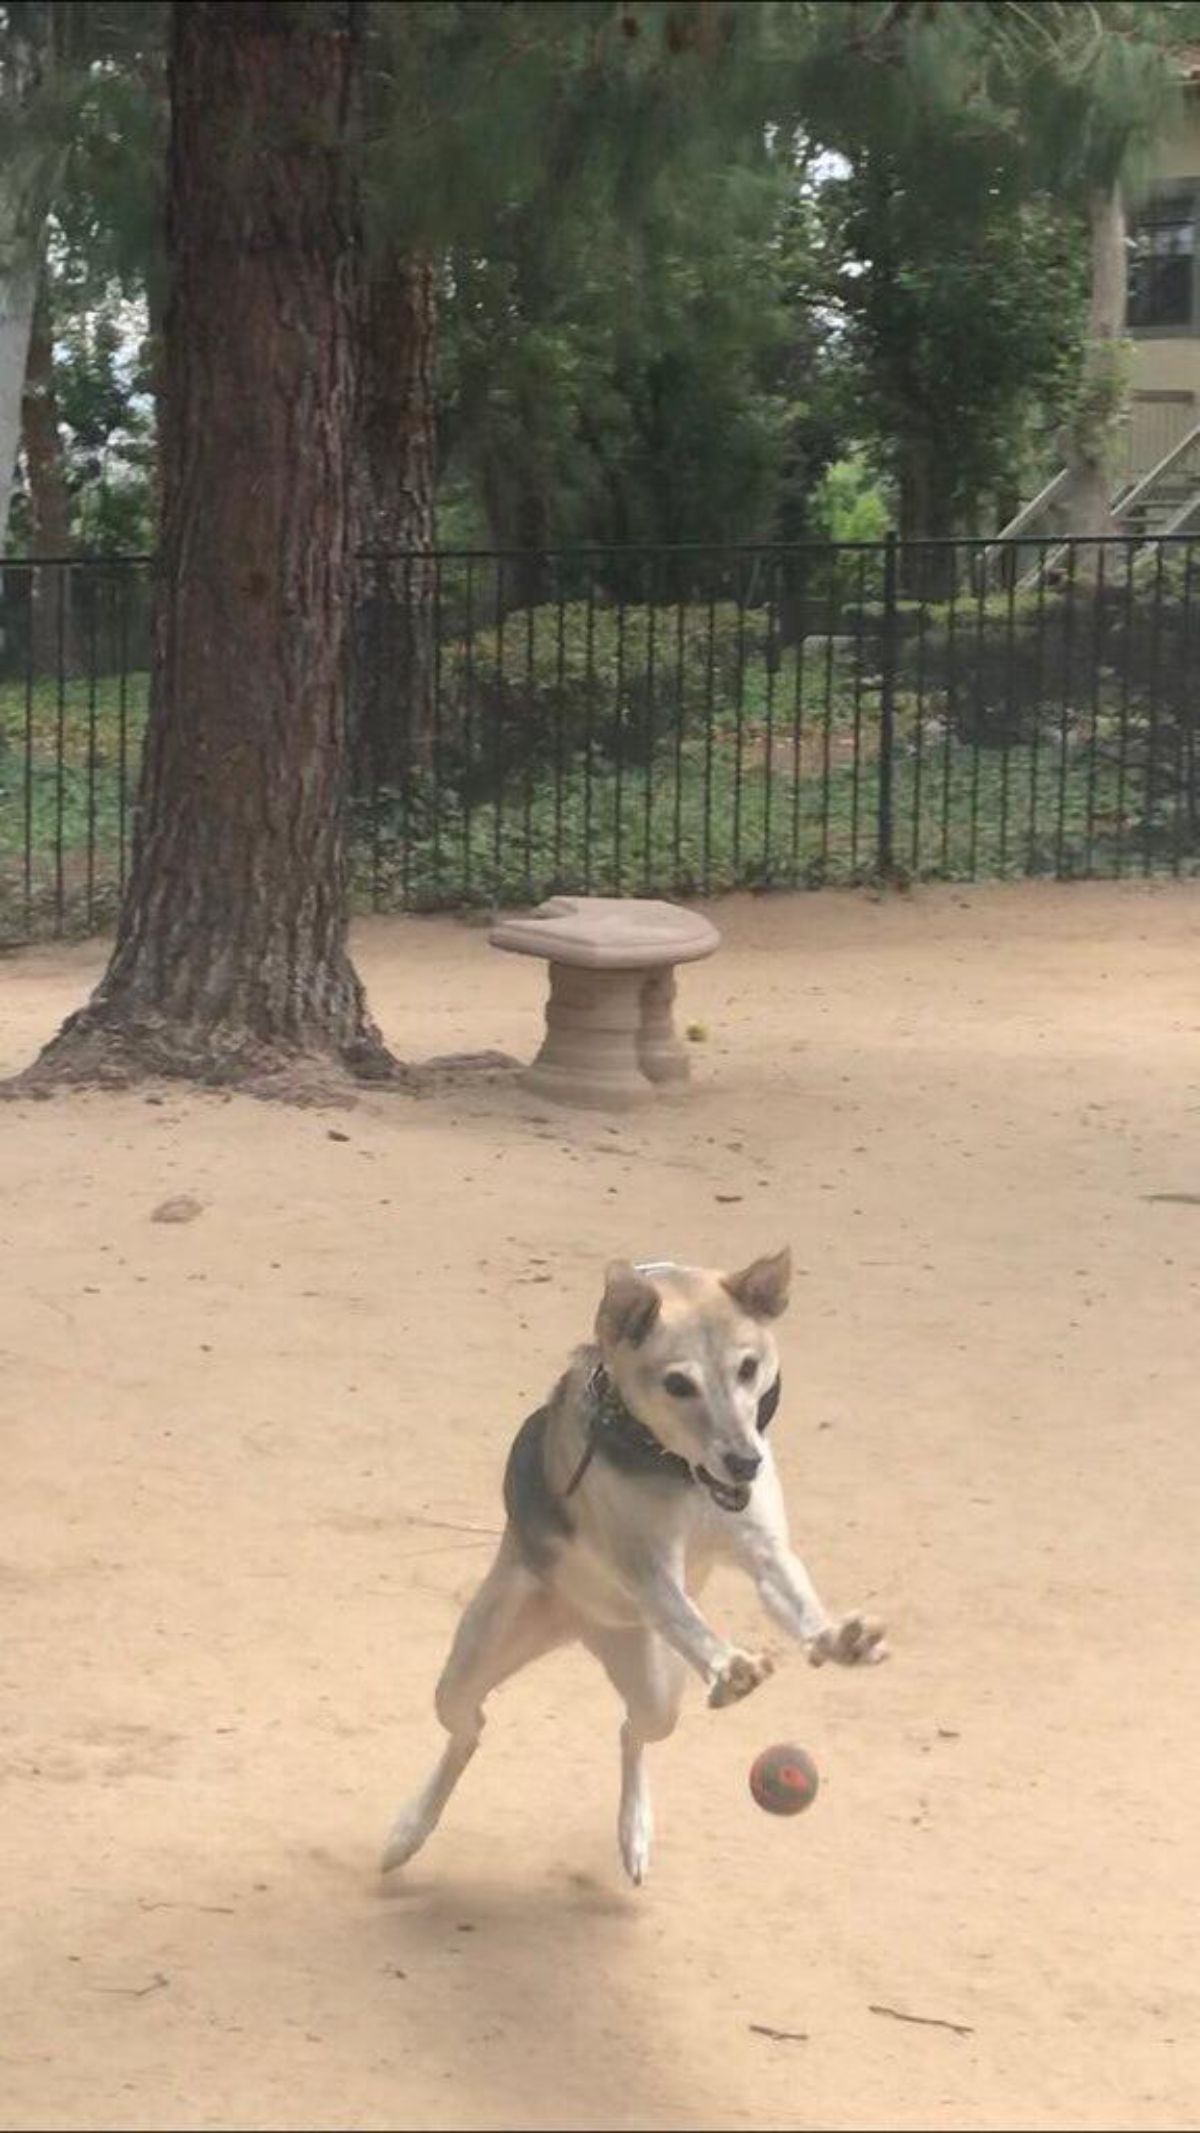 black white and brown dog caught mid lunge at a red and grey ball